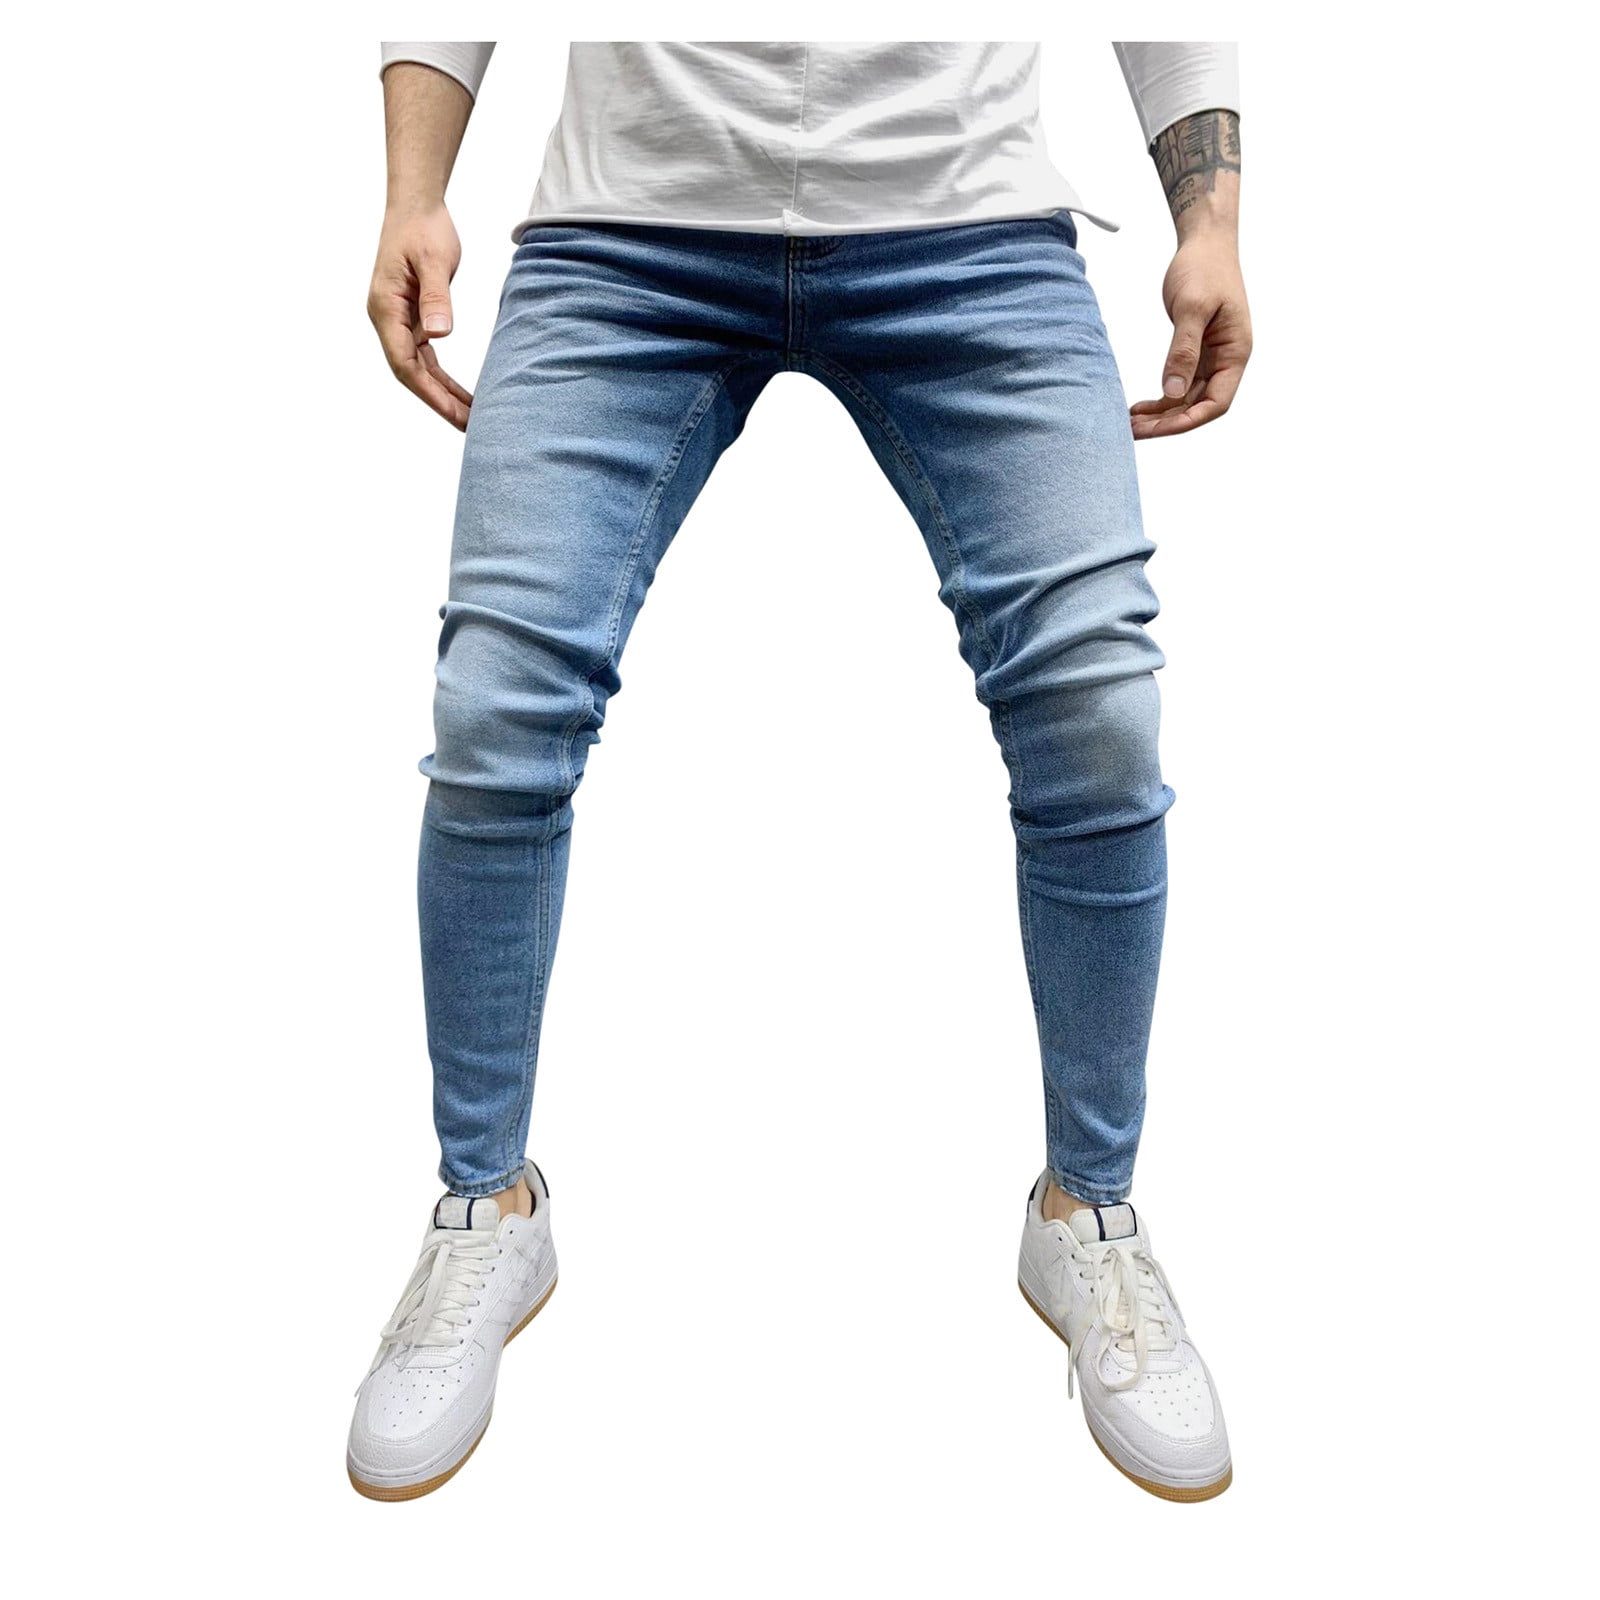 Stamzod Jeans For Men Slim Fitted Stretch Skinny Wear-Resistanting ...